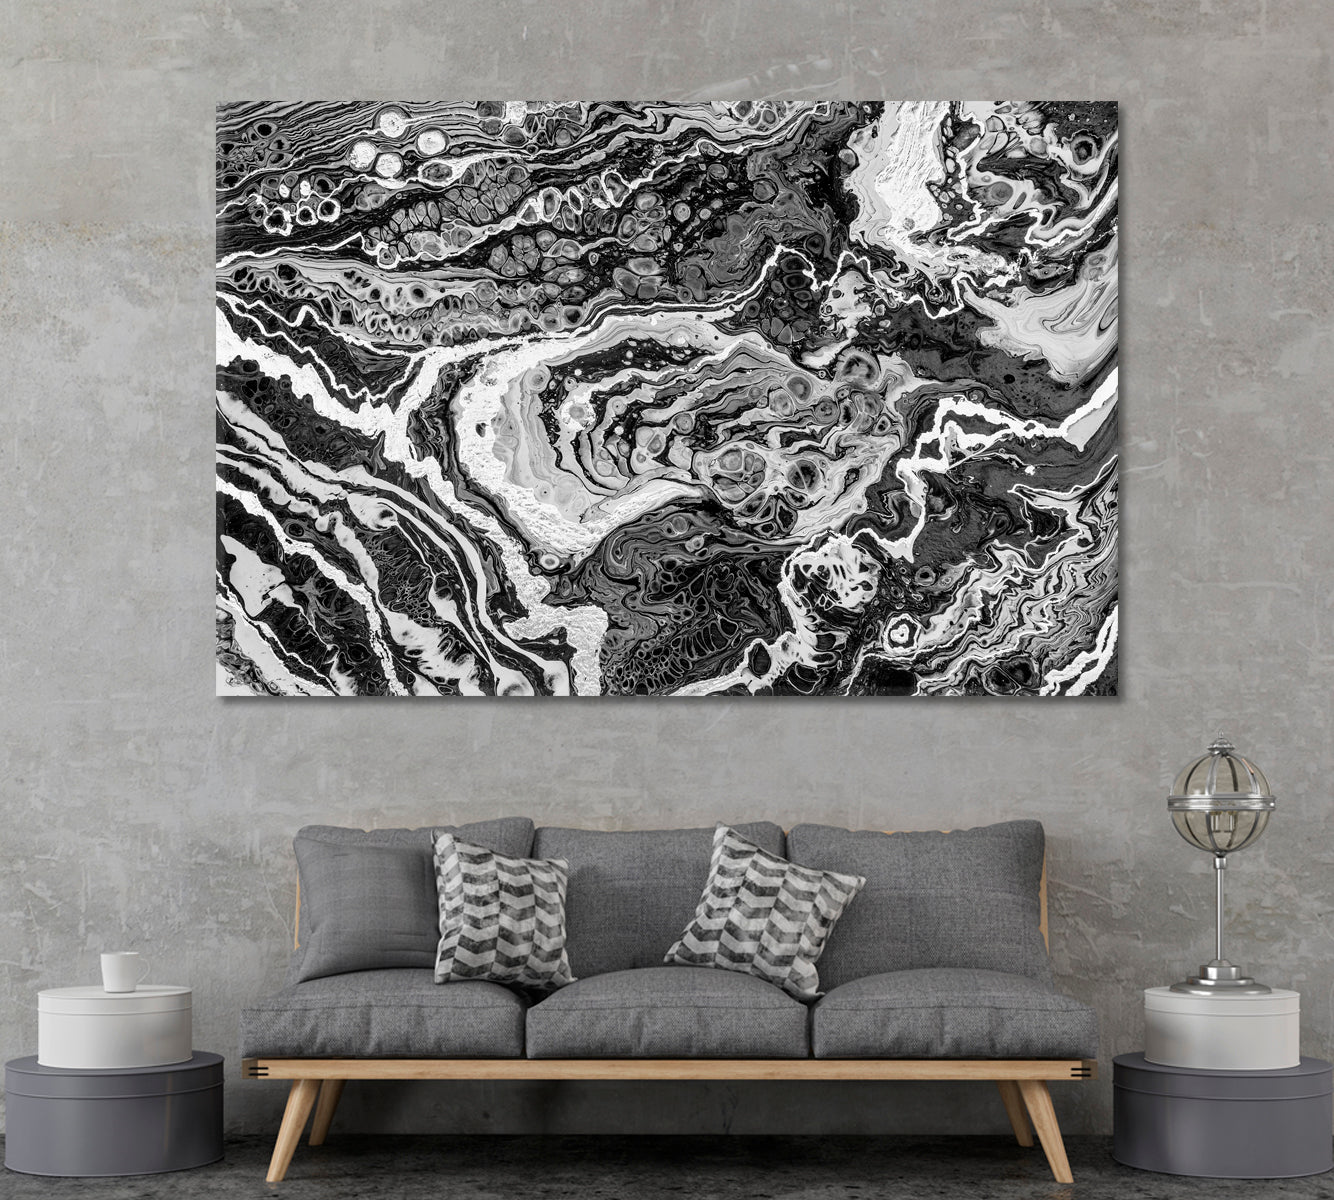 Luxury Contemporary Fluid Black and White Marble Canvas Print ArtLexy 1 Panel 24"x16" inches 